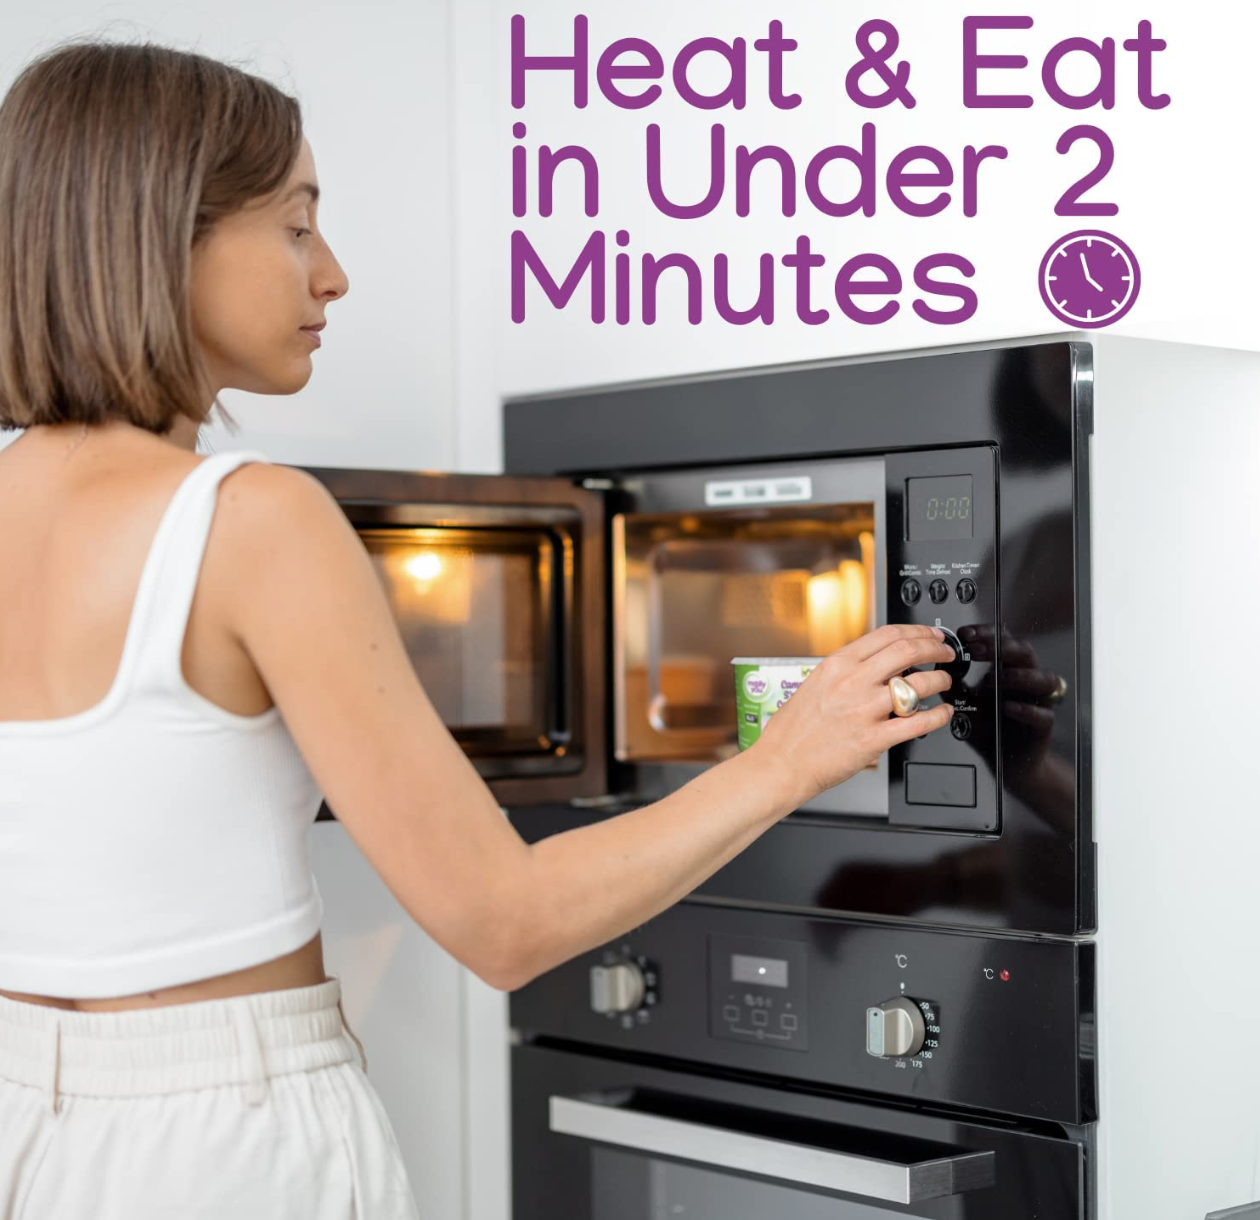 Heat and Eat in Under 2 Minutes